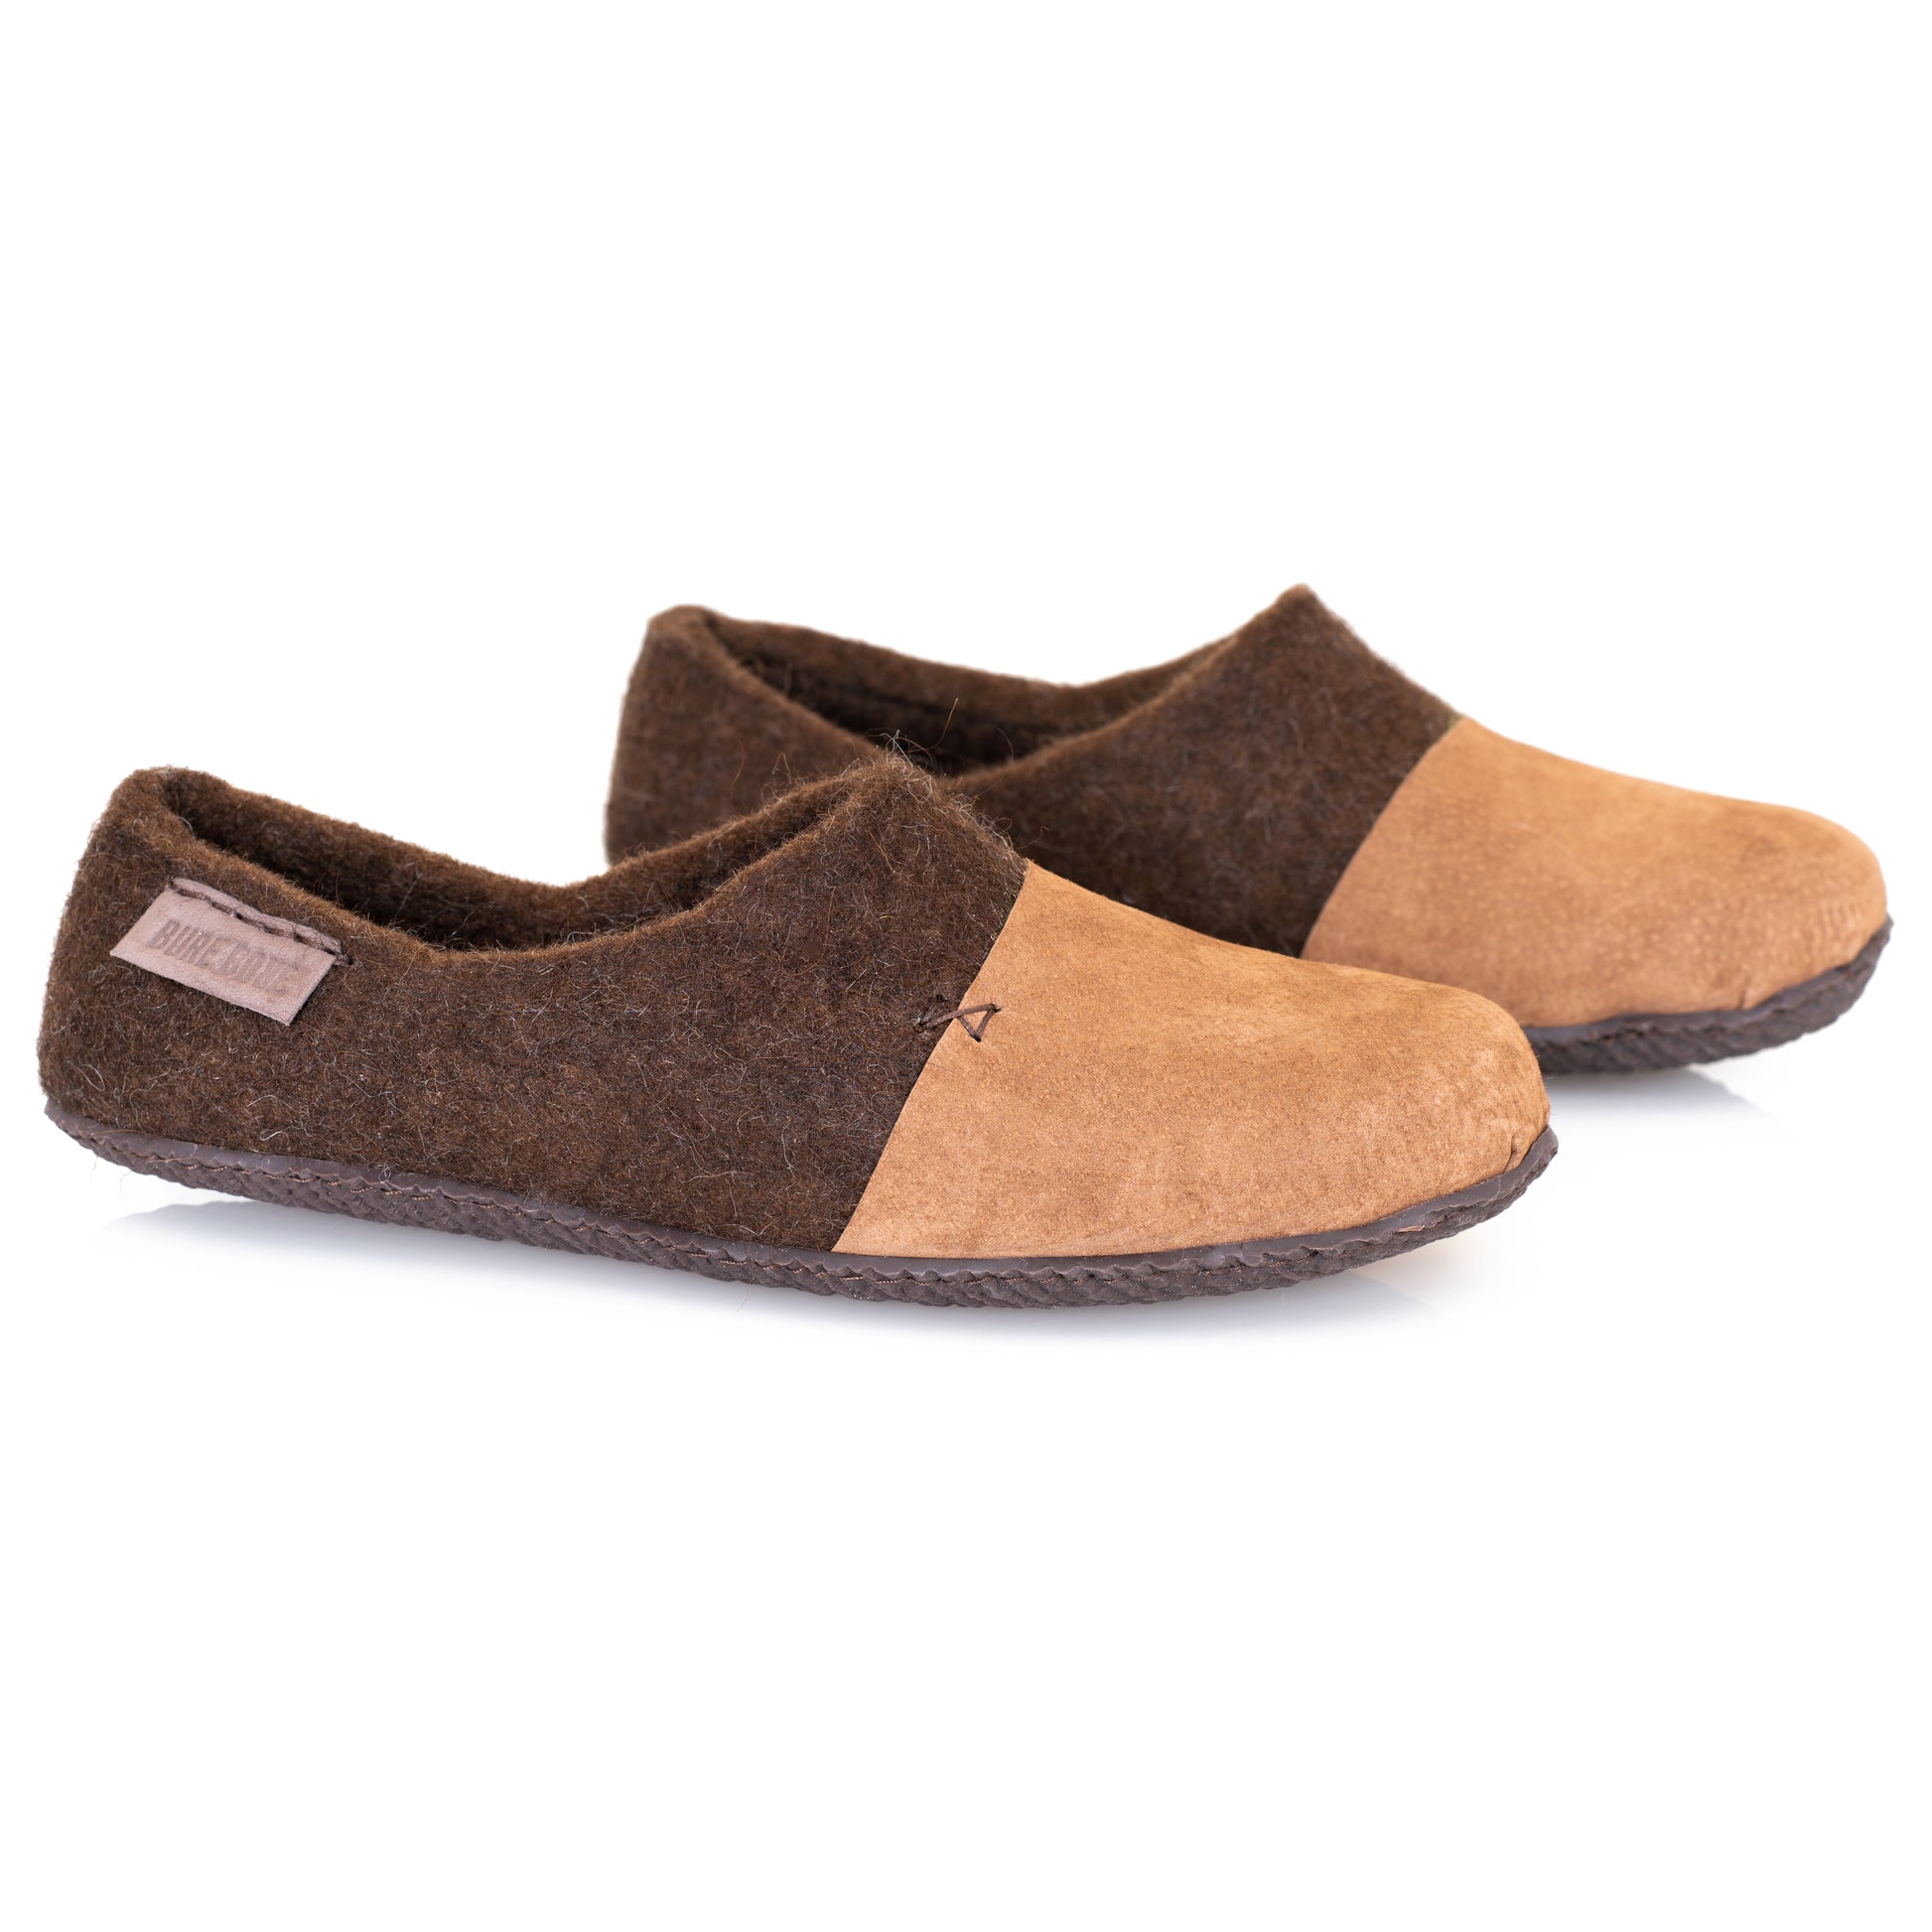 Brown woocaps clogs for women handmade from felted wool and strengthened with suede